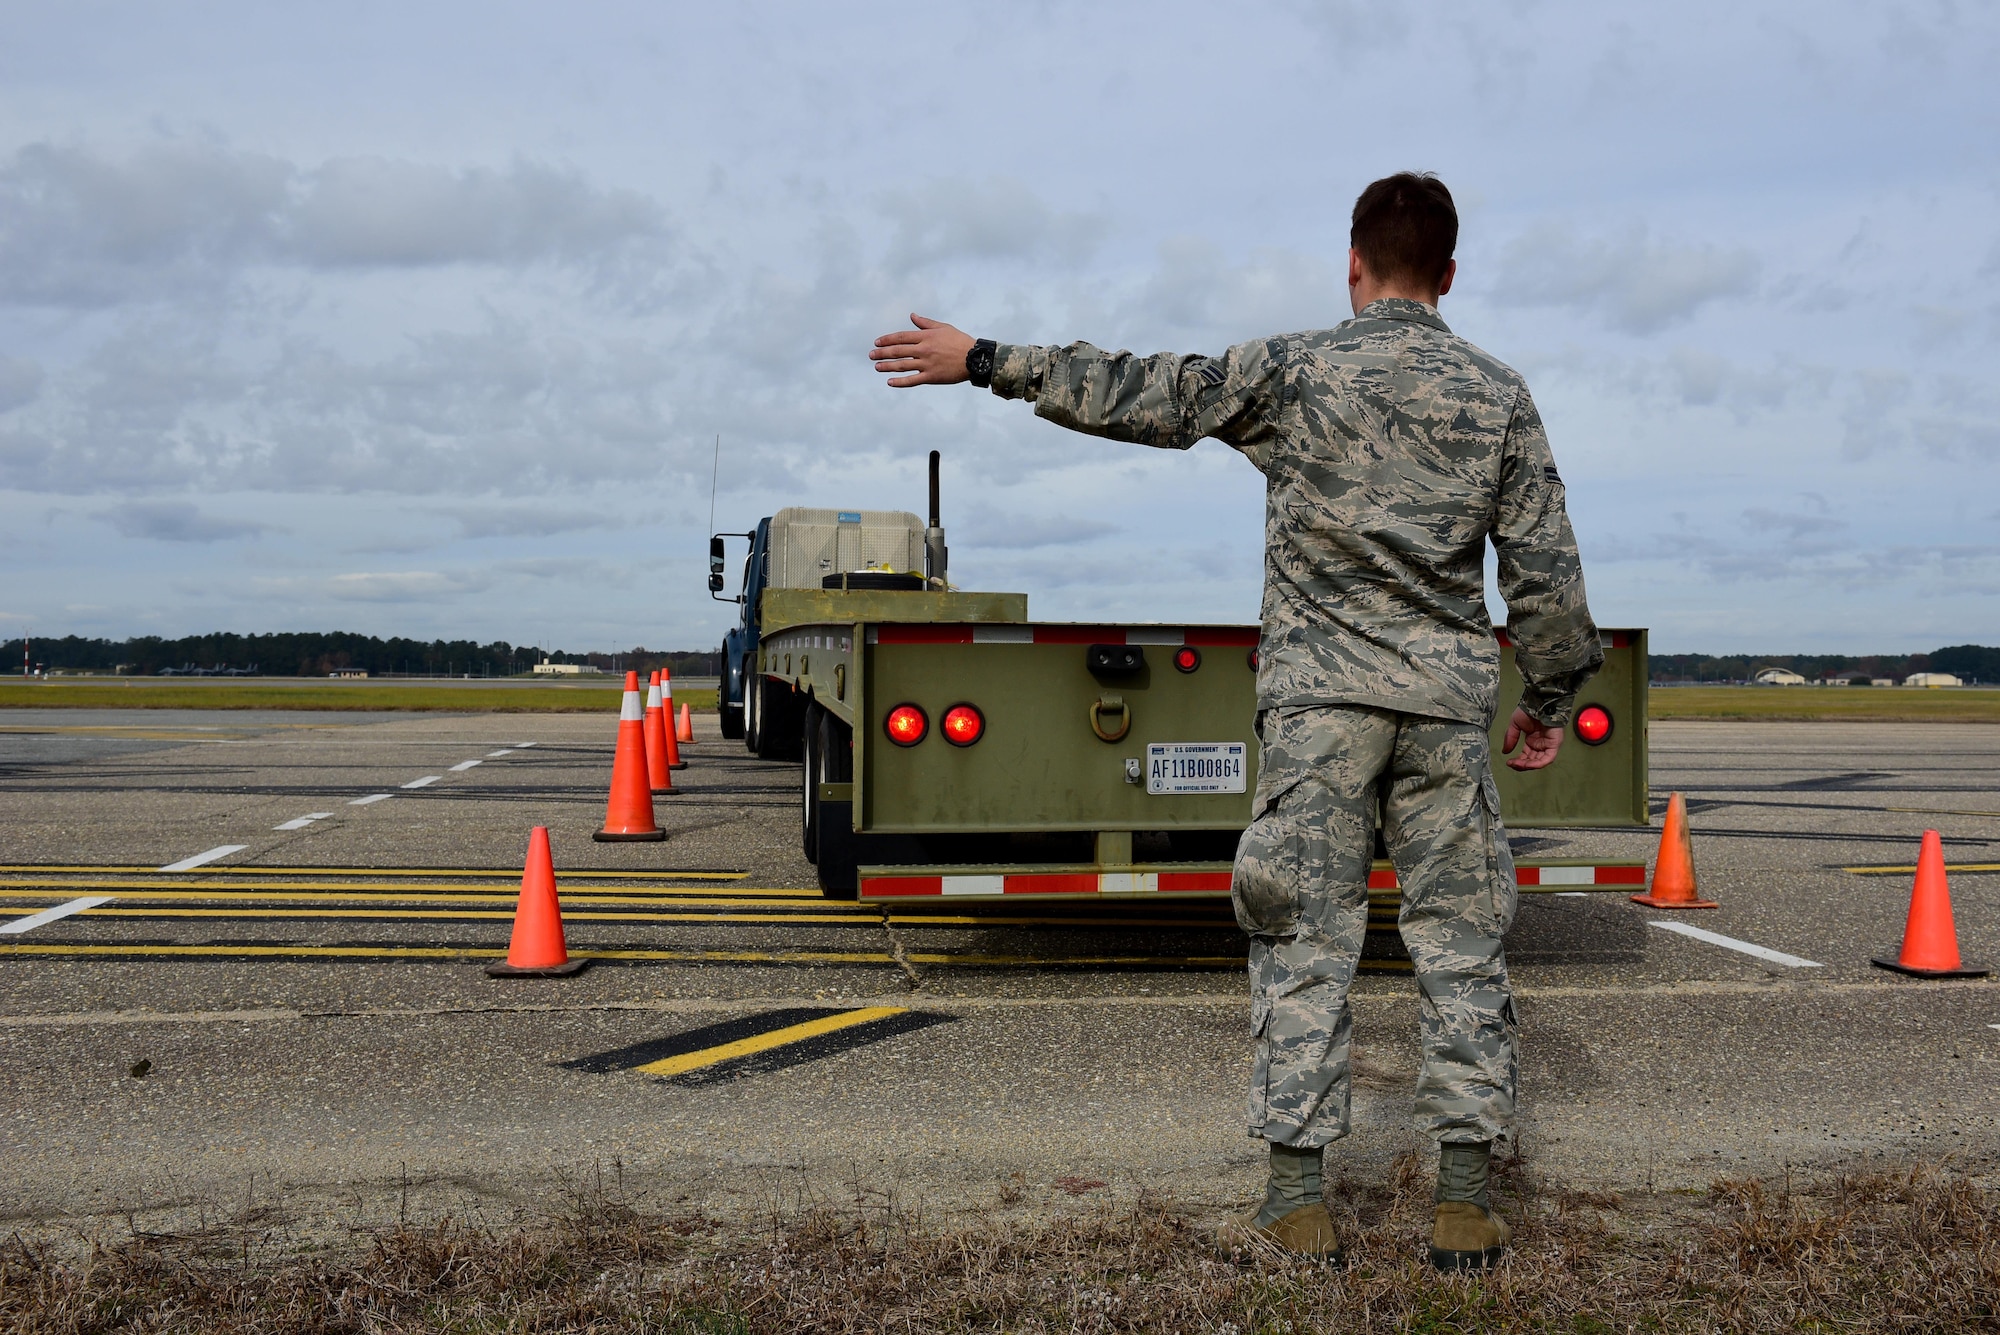 Airman 1st Class Cole Dredge, 4th Logistics Readiness Squadron vehicle operator, helps direct a tractor trailer into a parking spot during training, Nov. 21, 2017, at Seymour Johnson Air Force Base, North Carolina. During the 336th Fighter Squadron’s deployment, October 2017, two Airmen drove a tractor trailer containing 16,000 pounds of equipment from Seymour Johnson AFB to Canadian Forces Base Greenwood, Nova Scotia, Canada to provide parts for diverted aircraft. (U.S. Air Force photo by Airman 1st Class Kenneth Boyton)